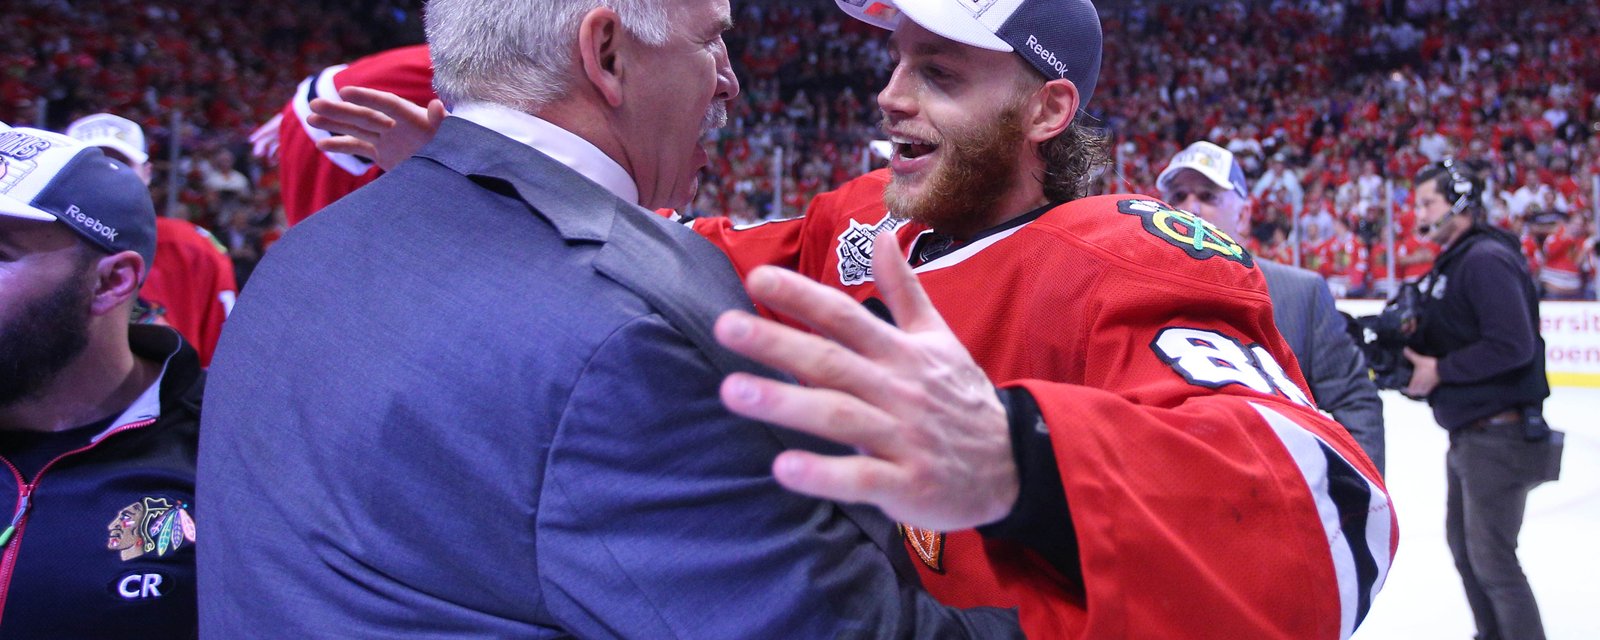 Patrick Kane and former coach Quenneville share special moment before game 